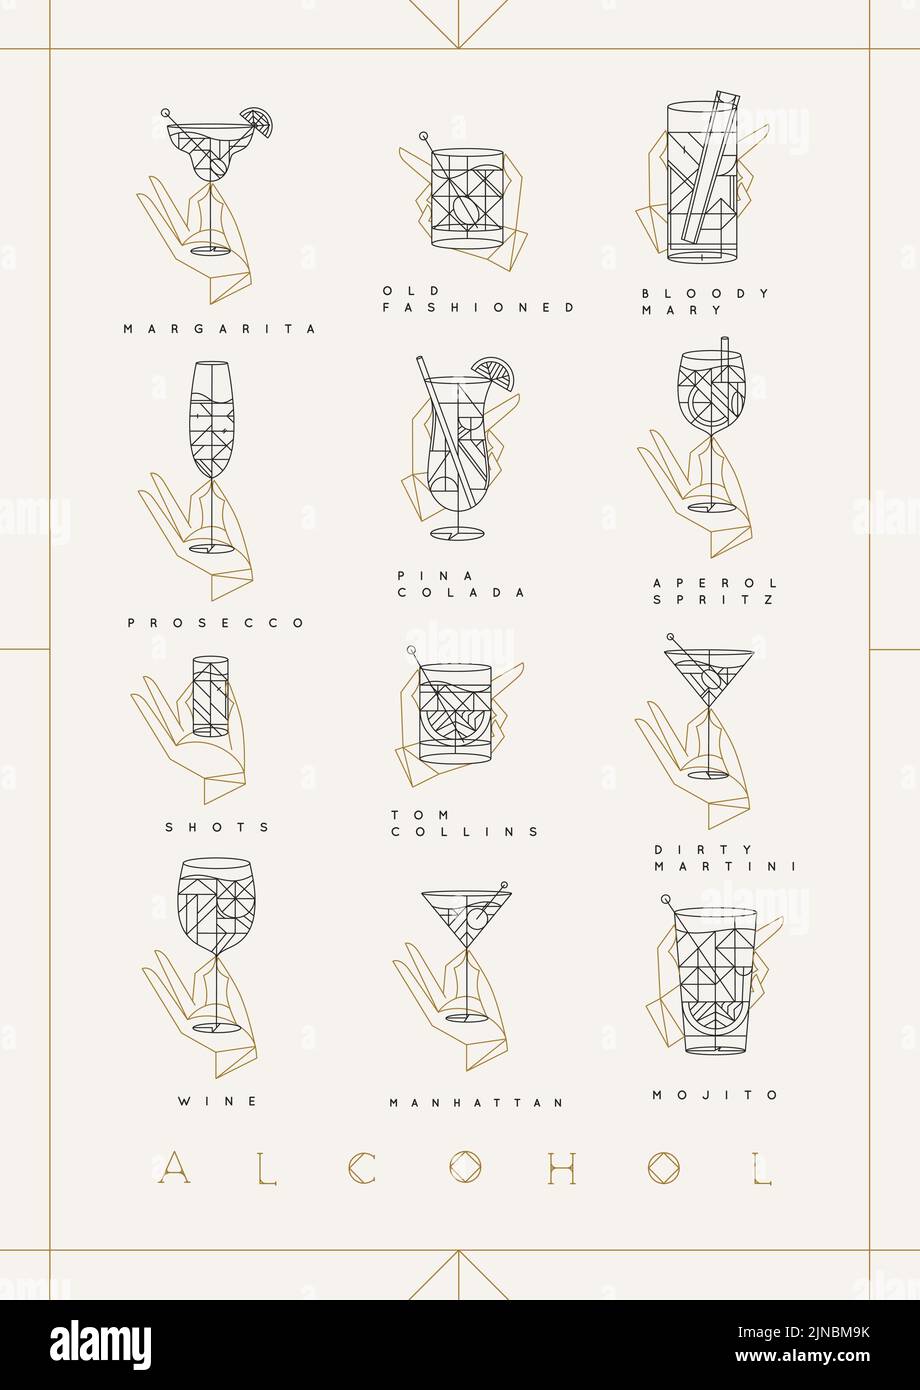 Art deco cocktails poster with glasses and names of the drink. Margarita, old fashioned, bloody mary, prosecco, pina colada, aperol spritz, shot, tom Stock Vector